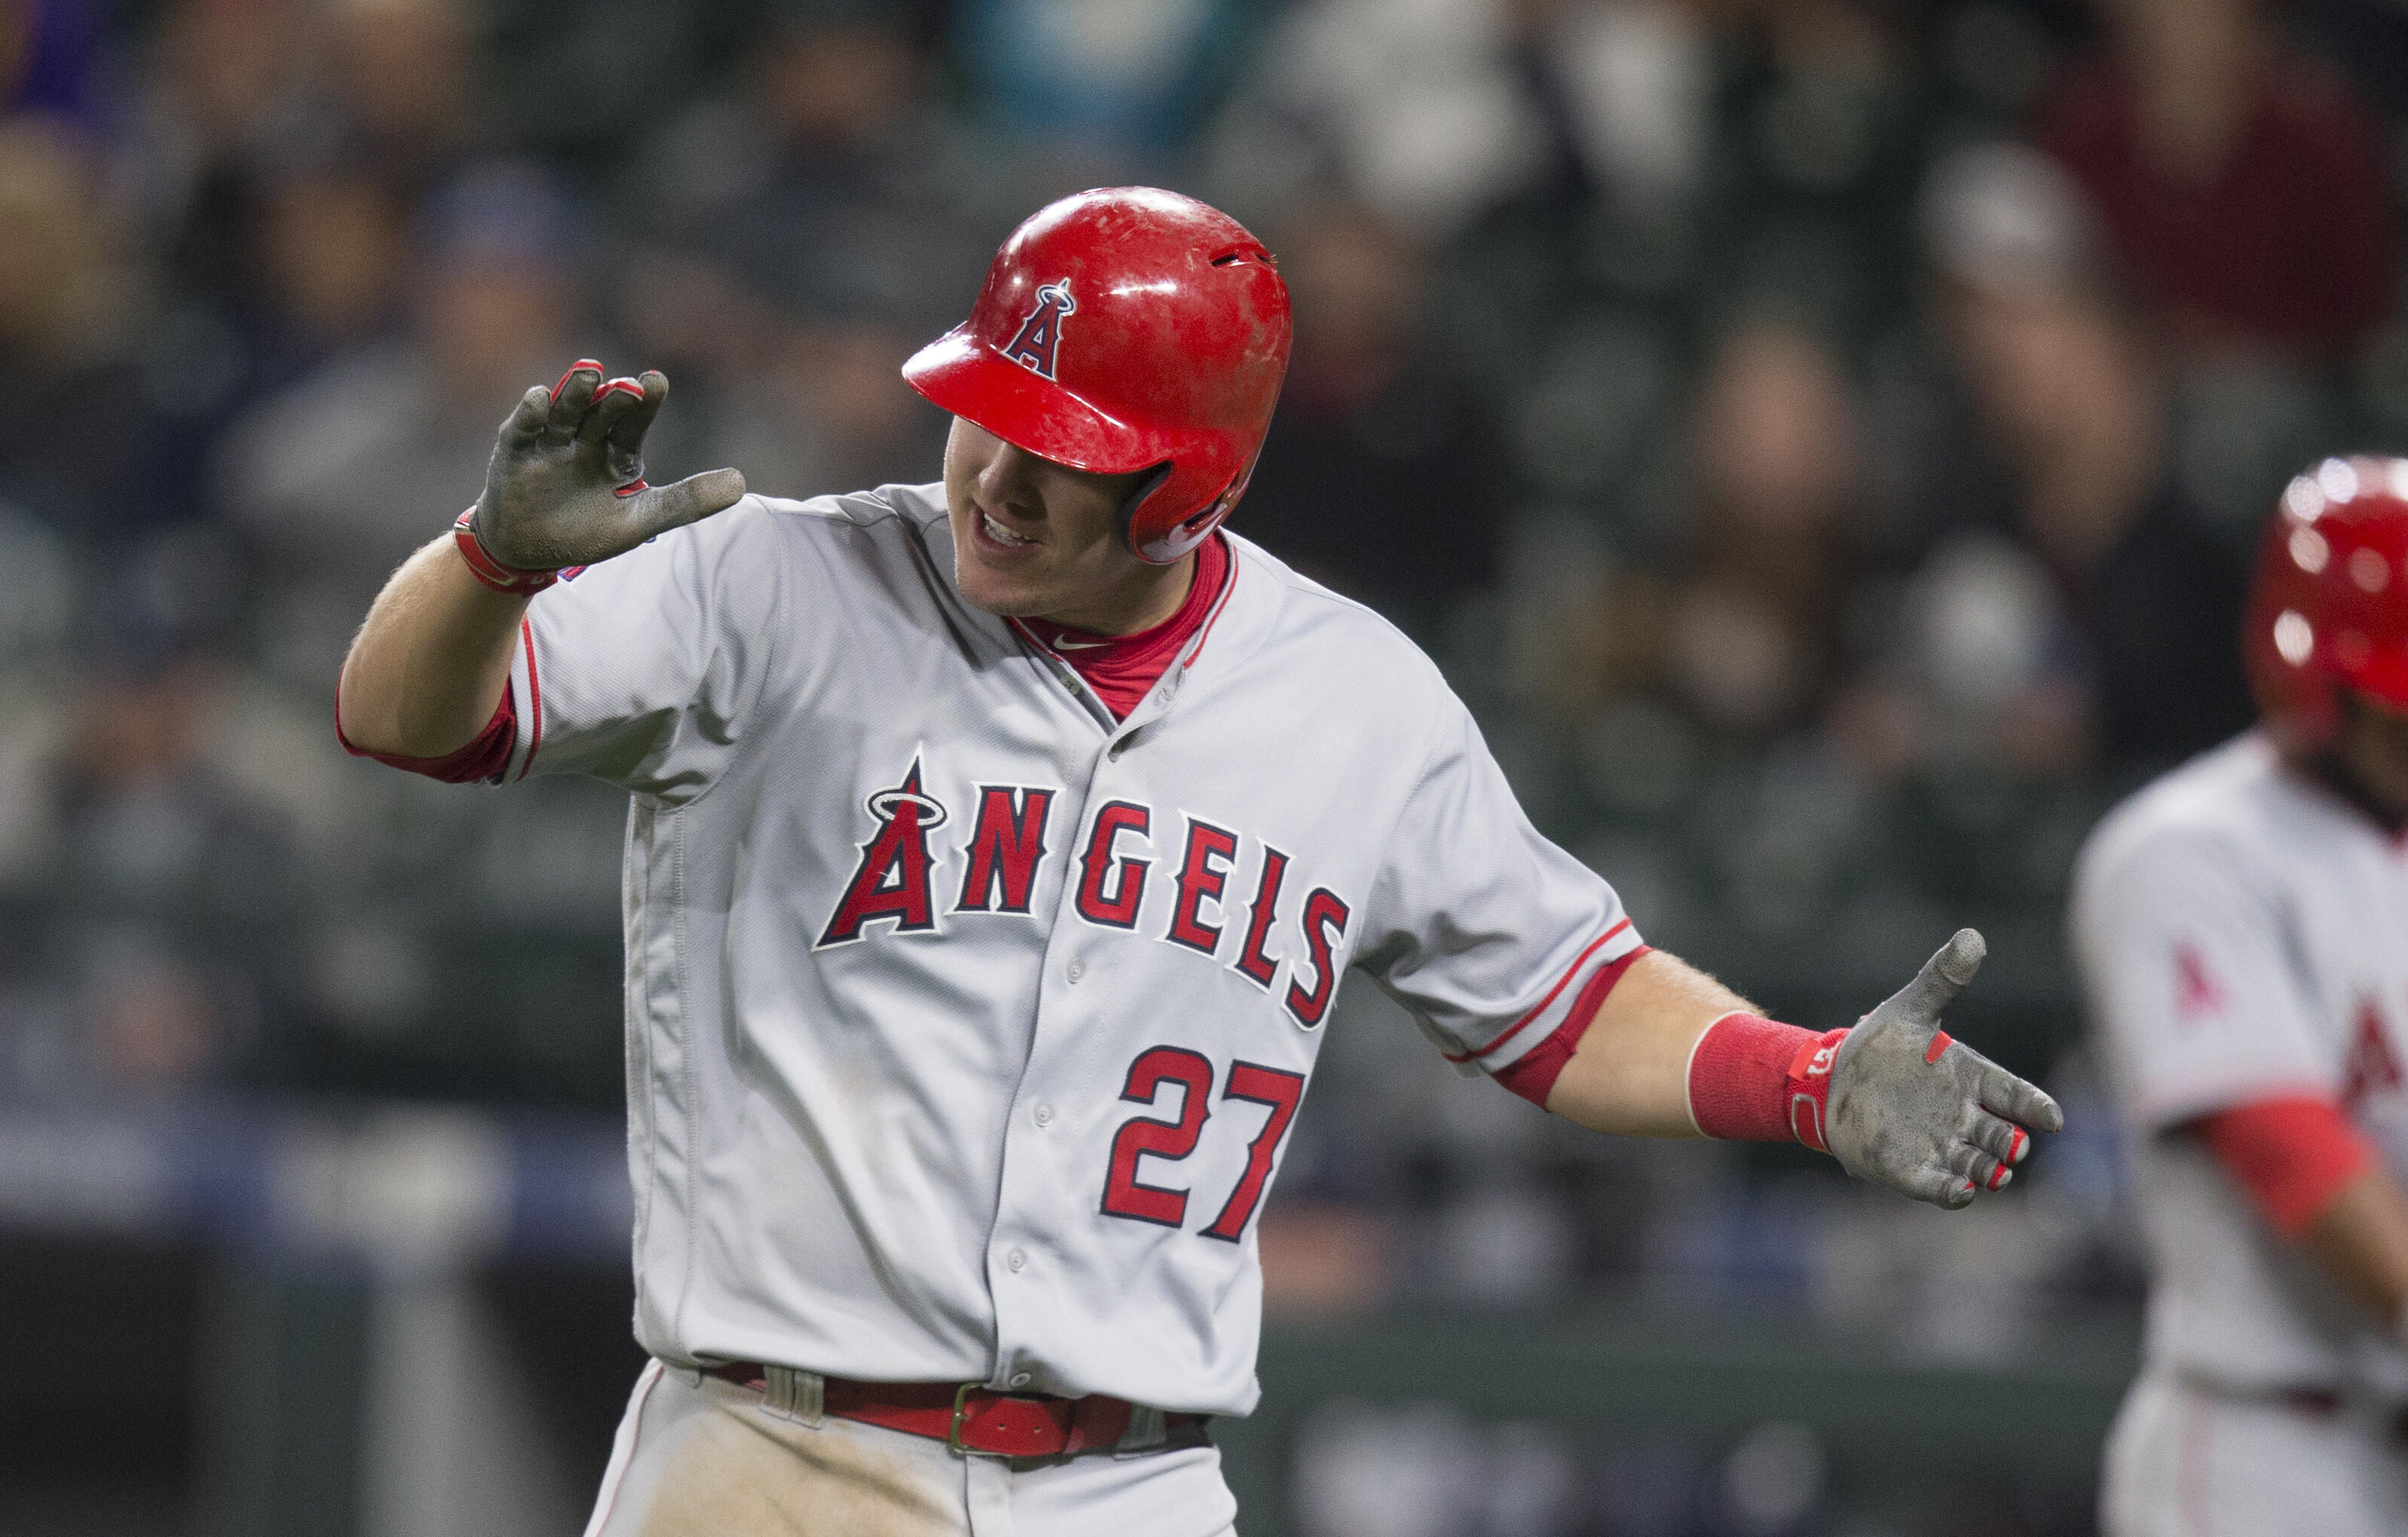 SEATTLE, WA - MAY 2: Mike Trout #27 of the Los Angeles Angels of Anaheim celebrates scoring a run on a double by Albert Pujols #5 of the Los Angeles Angels of Anaheim off of relief pitcher James Pazos #47 of the Seattle Mariners during the eleventh inning